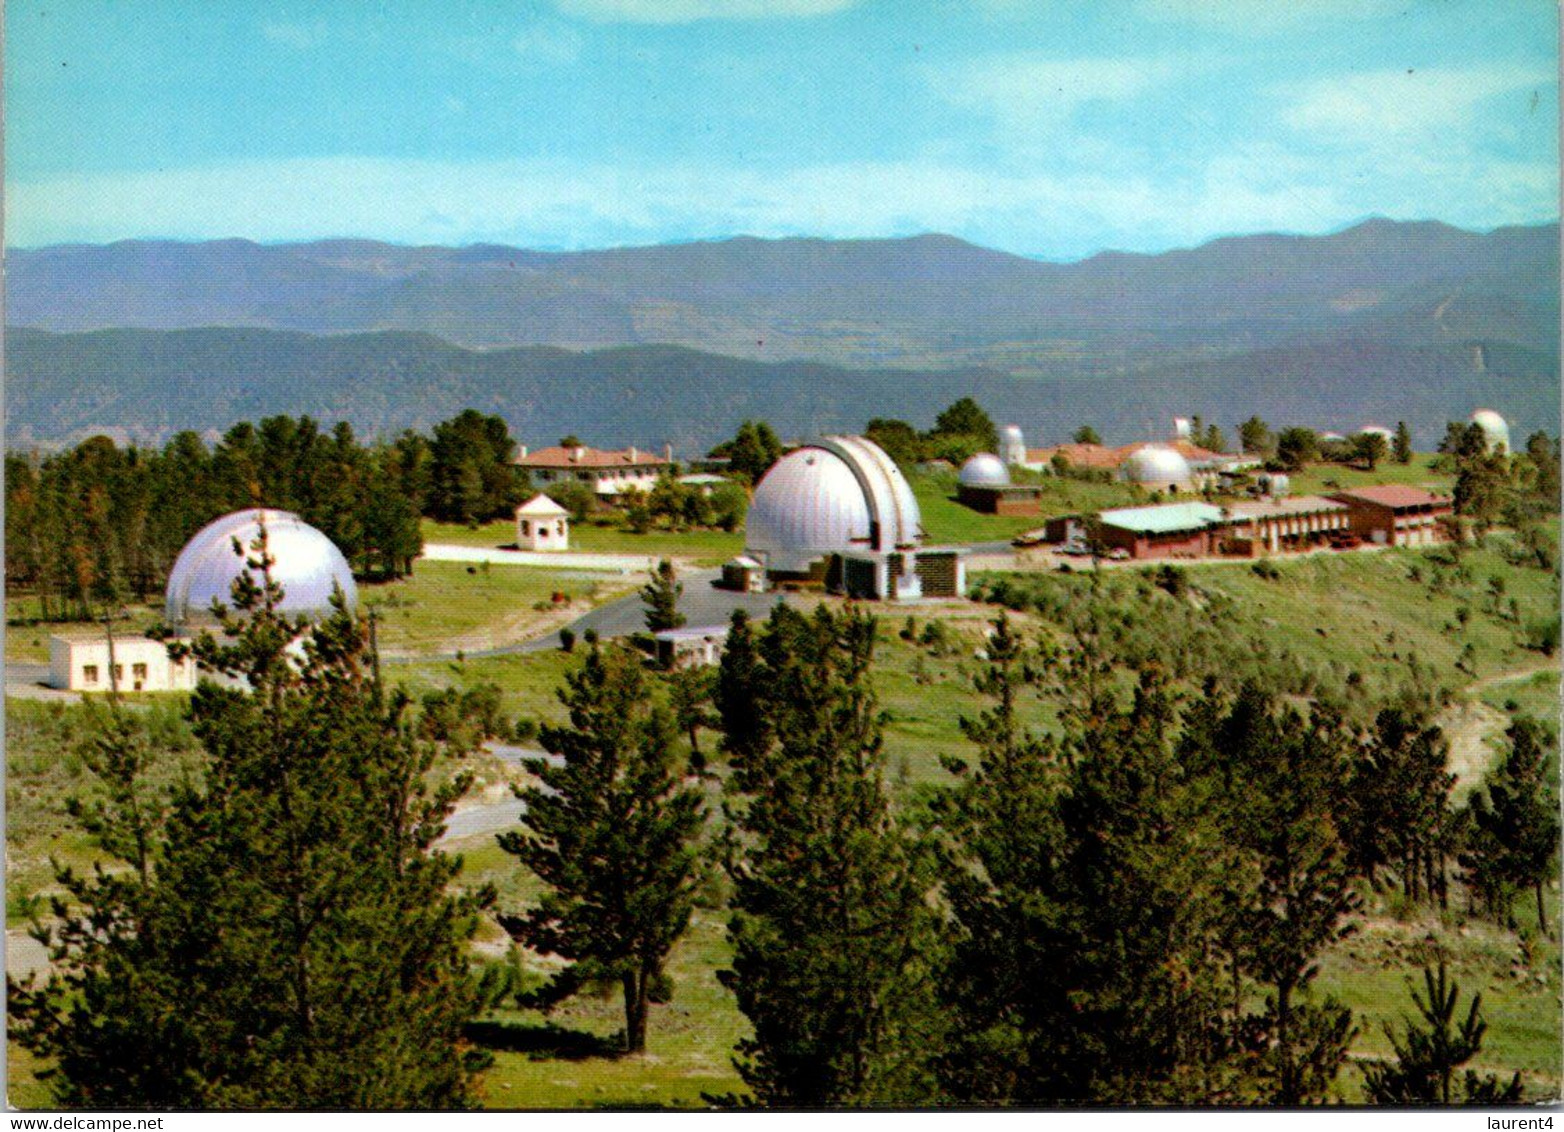 (2 N 10) Australia - ACT - Canberra - Mt Stromlo Observatory - Canberra (ACT)